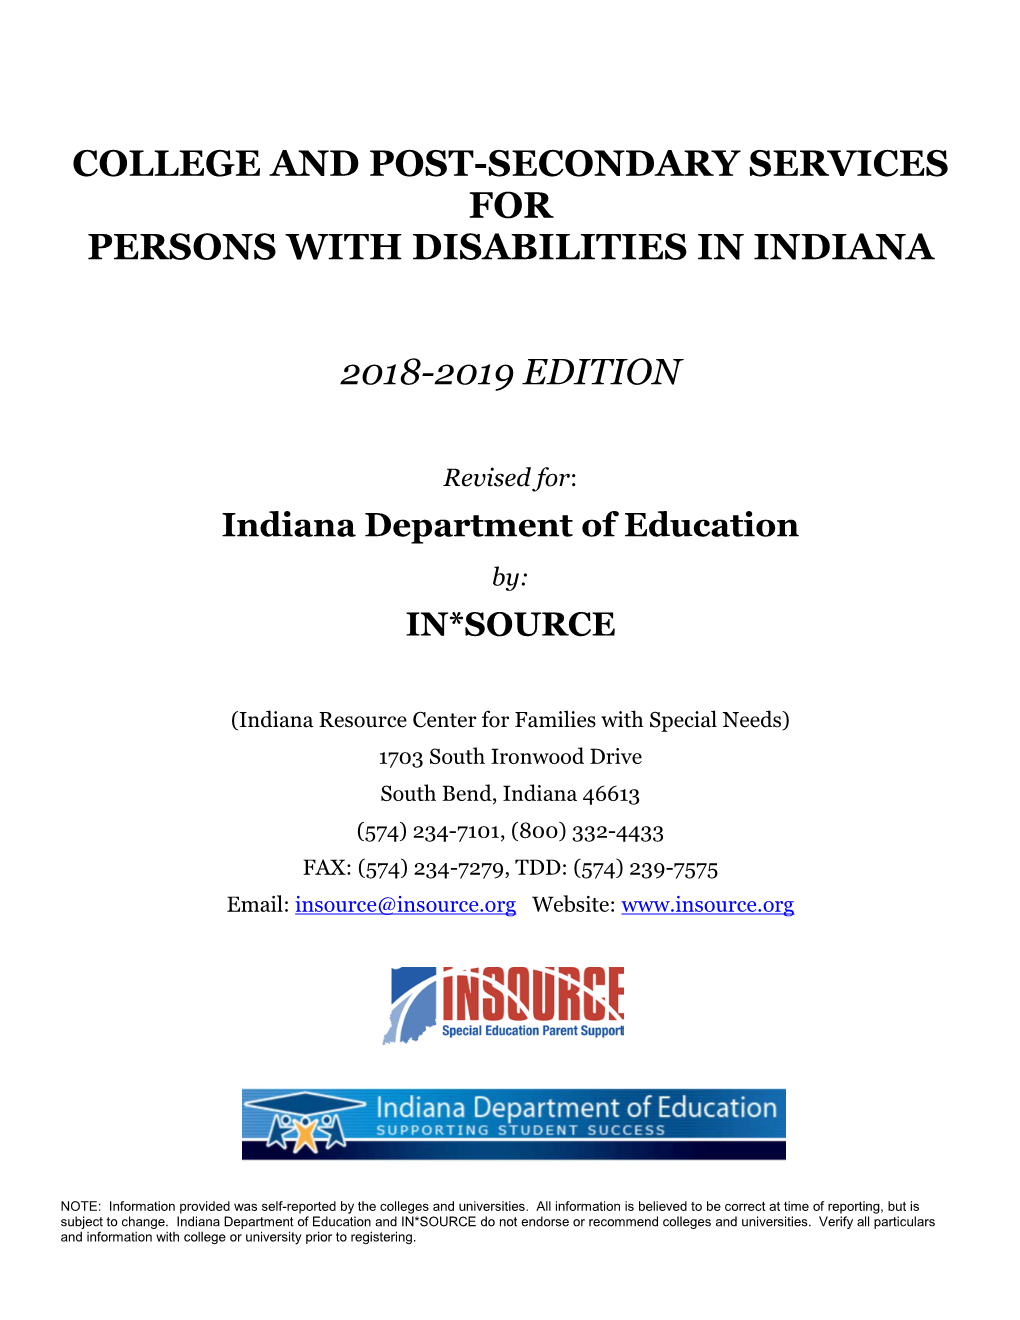 College and Post-Secondary Services for Persons with Disabilities in Indiana 2018-2019 Edition